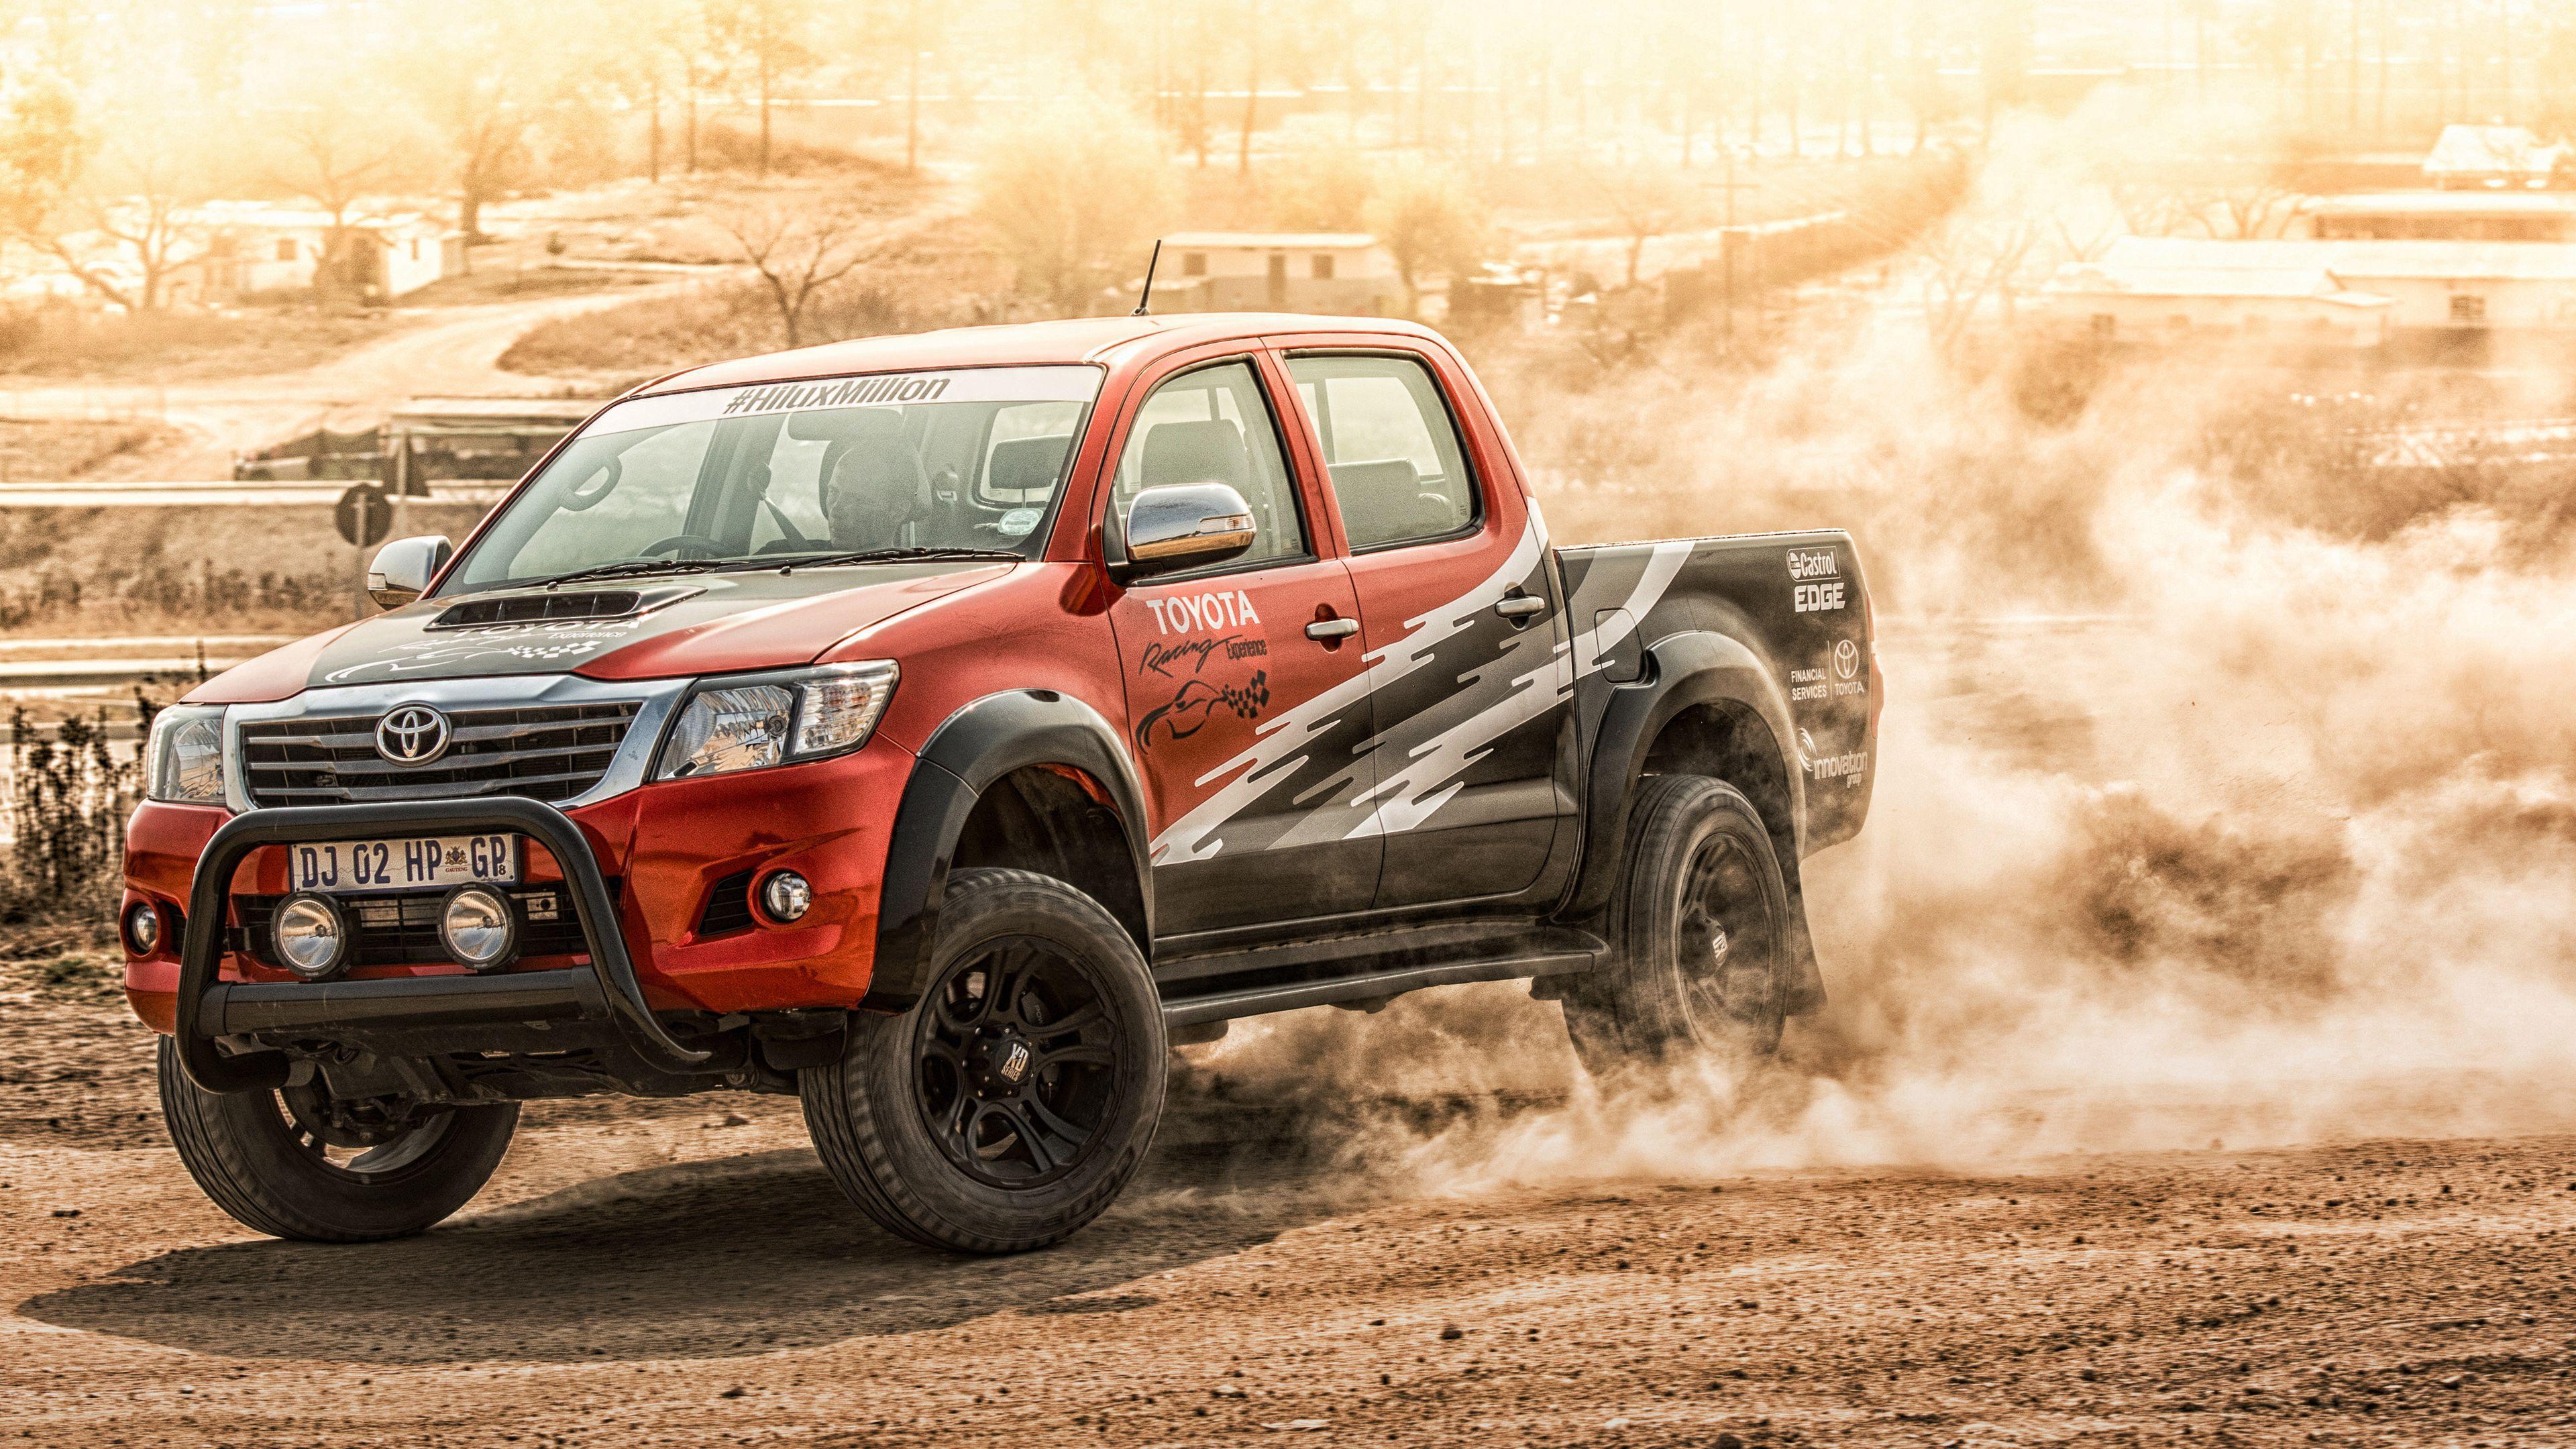 Toyota Hilux 2015 Wallpaper - Toyota Hilux , HD Wallpaper & Backgrounds